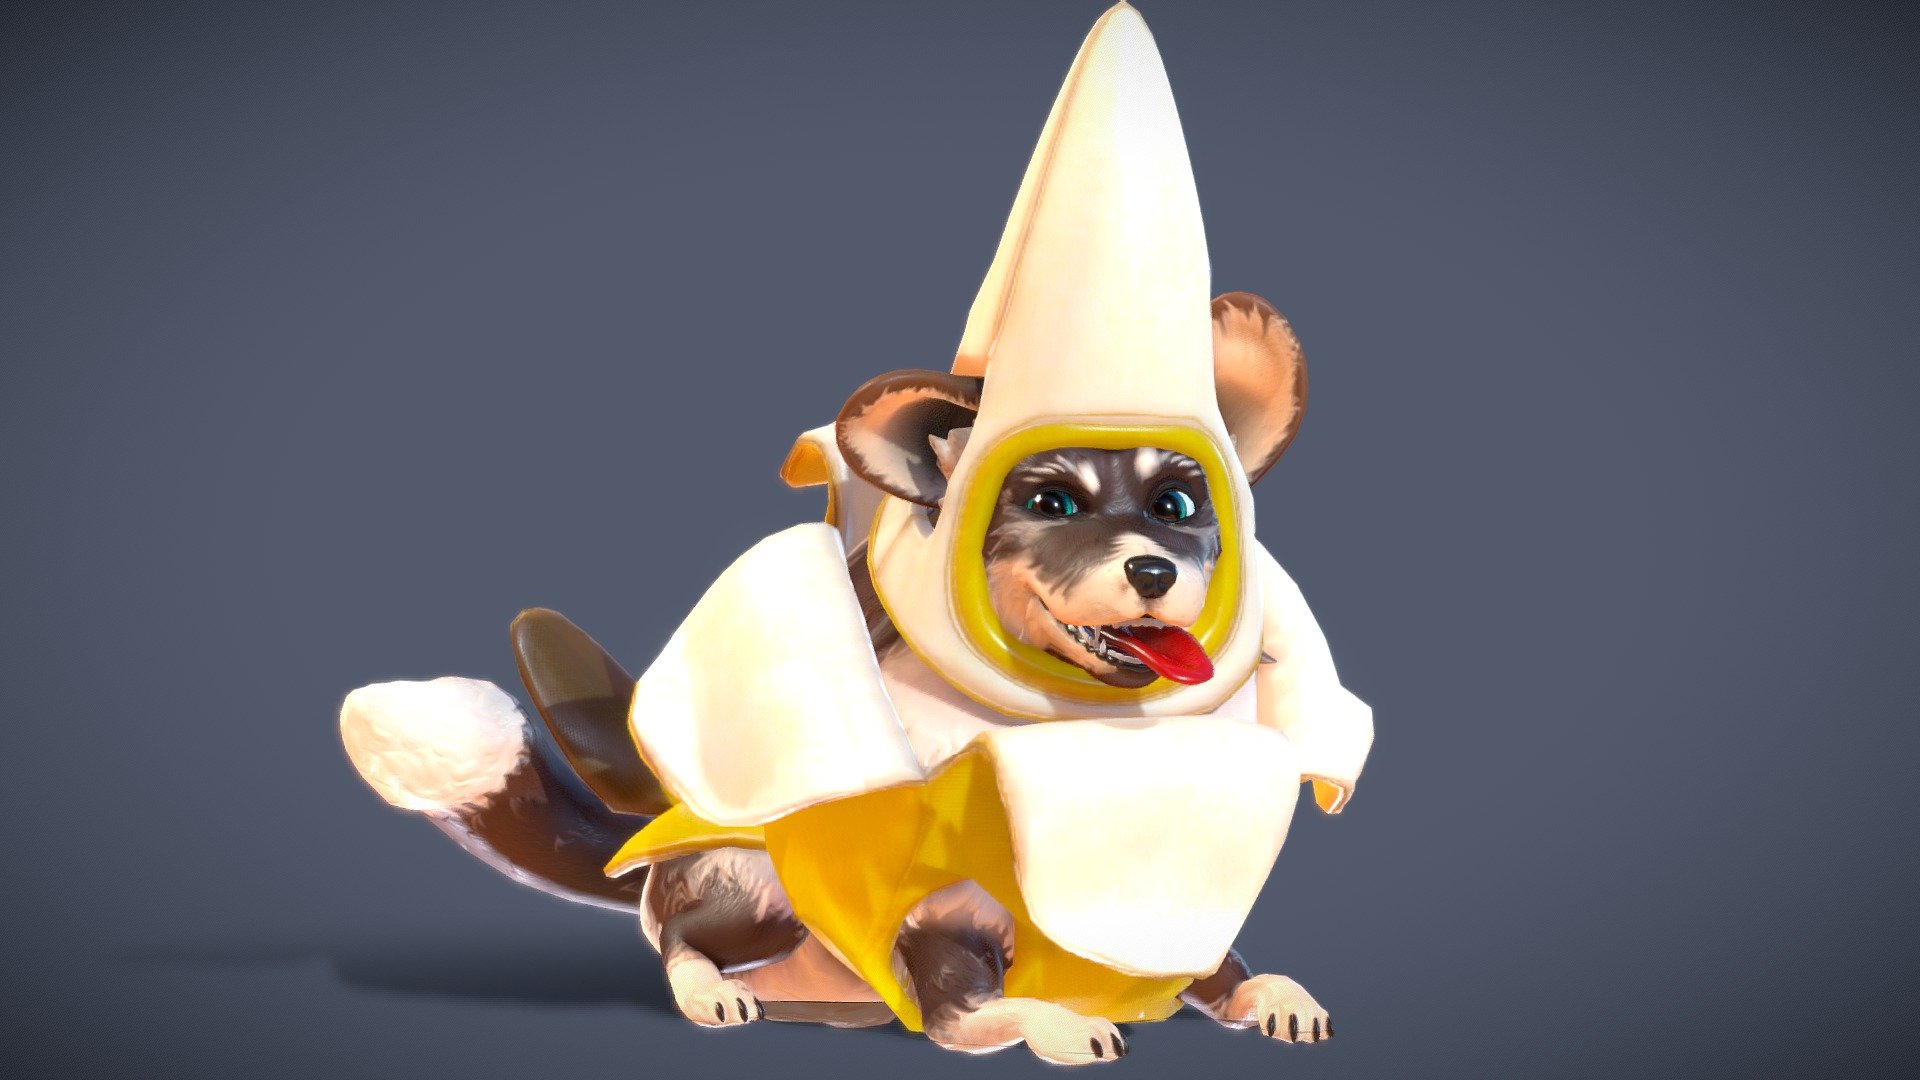 Follow my Artstation for more: https://www.artstation.com/pasco295

An expansion Pack for https://sketchfab.com/3d-models/corgi-animated-132e3bb7e52f47c89bba65bbb5978e4b 

Includes:

Animations - Sleeping, Lying down, Alternative Sitting

Fully Setup control rig in a clean file.

Maya files for each animation.

Full set of PBR Textures.

Alternative Corgi Textures.

OBJ and FBX file of just the mesh.

An Export of the rig and animations in .fbx format for directly importing to Unity/Unreal.

Animations fully compatible with other packs
Model has removed geometry for parts of the corgi that are not visible underneath the outfit - Corgi Banana Expansion Pack - Buy Royalty Free 3D model by pasco295 3d model